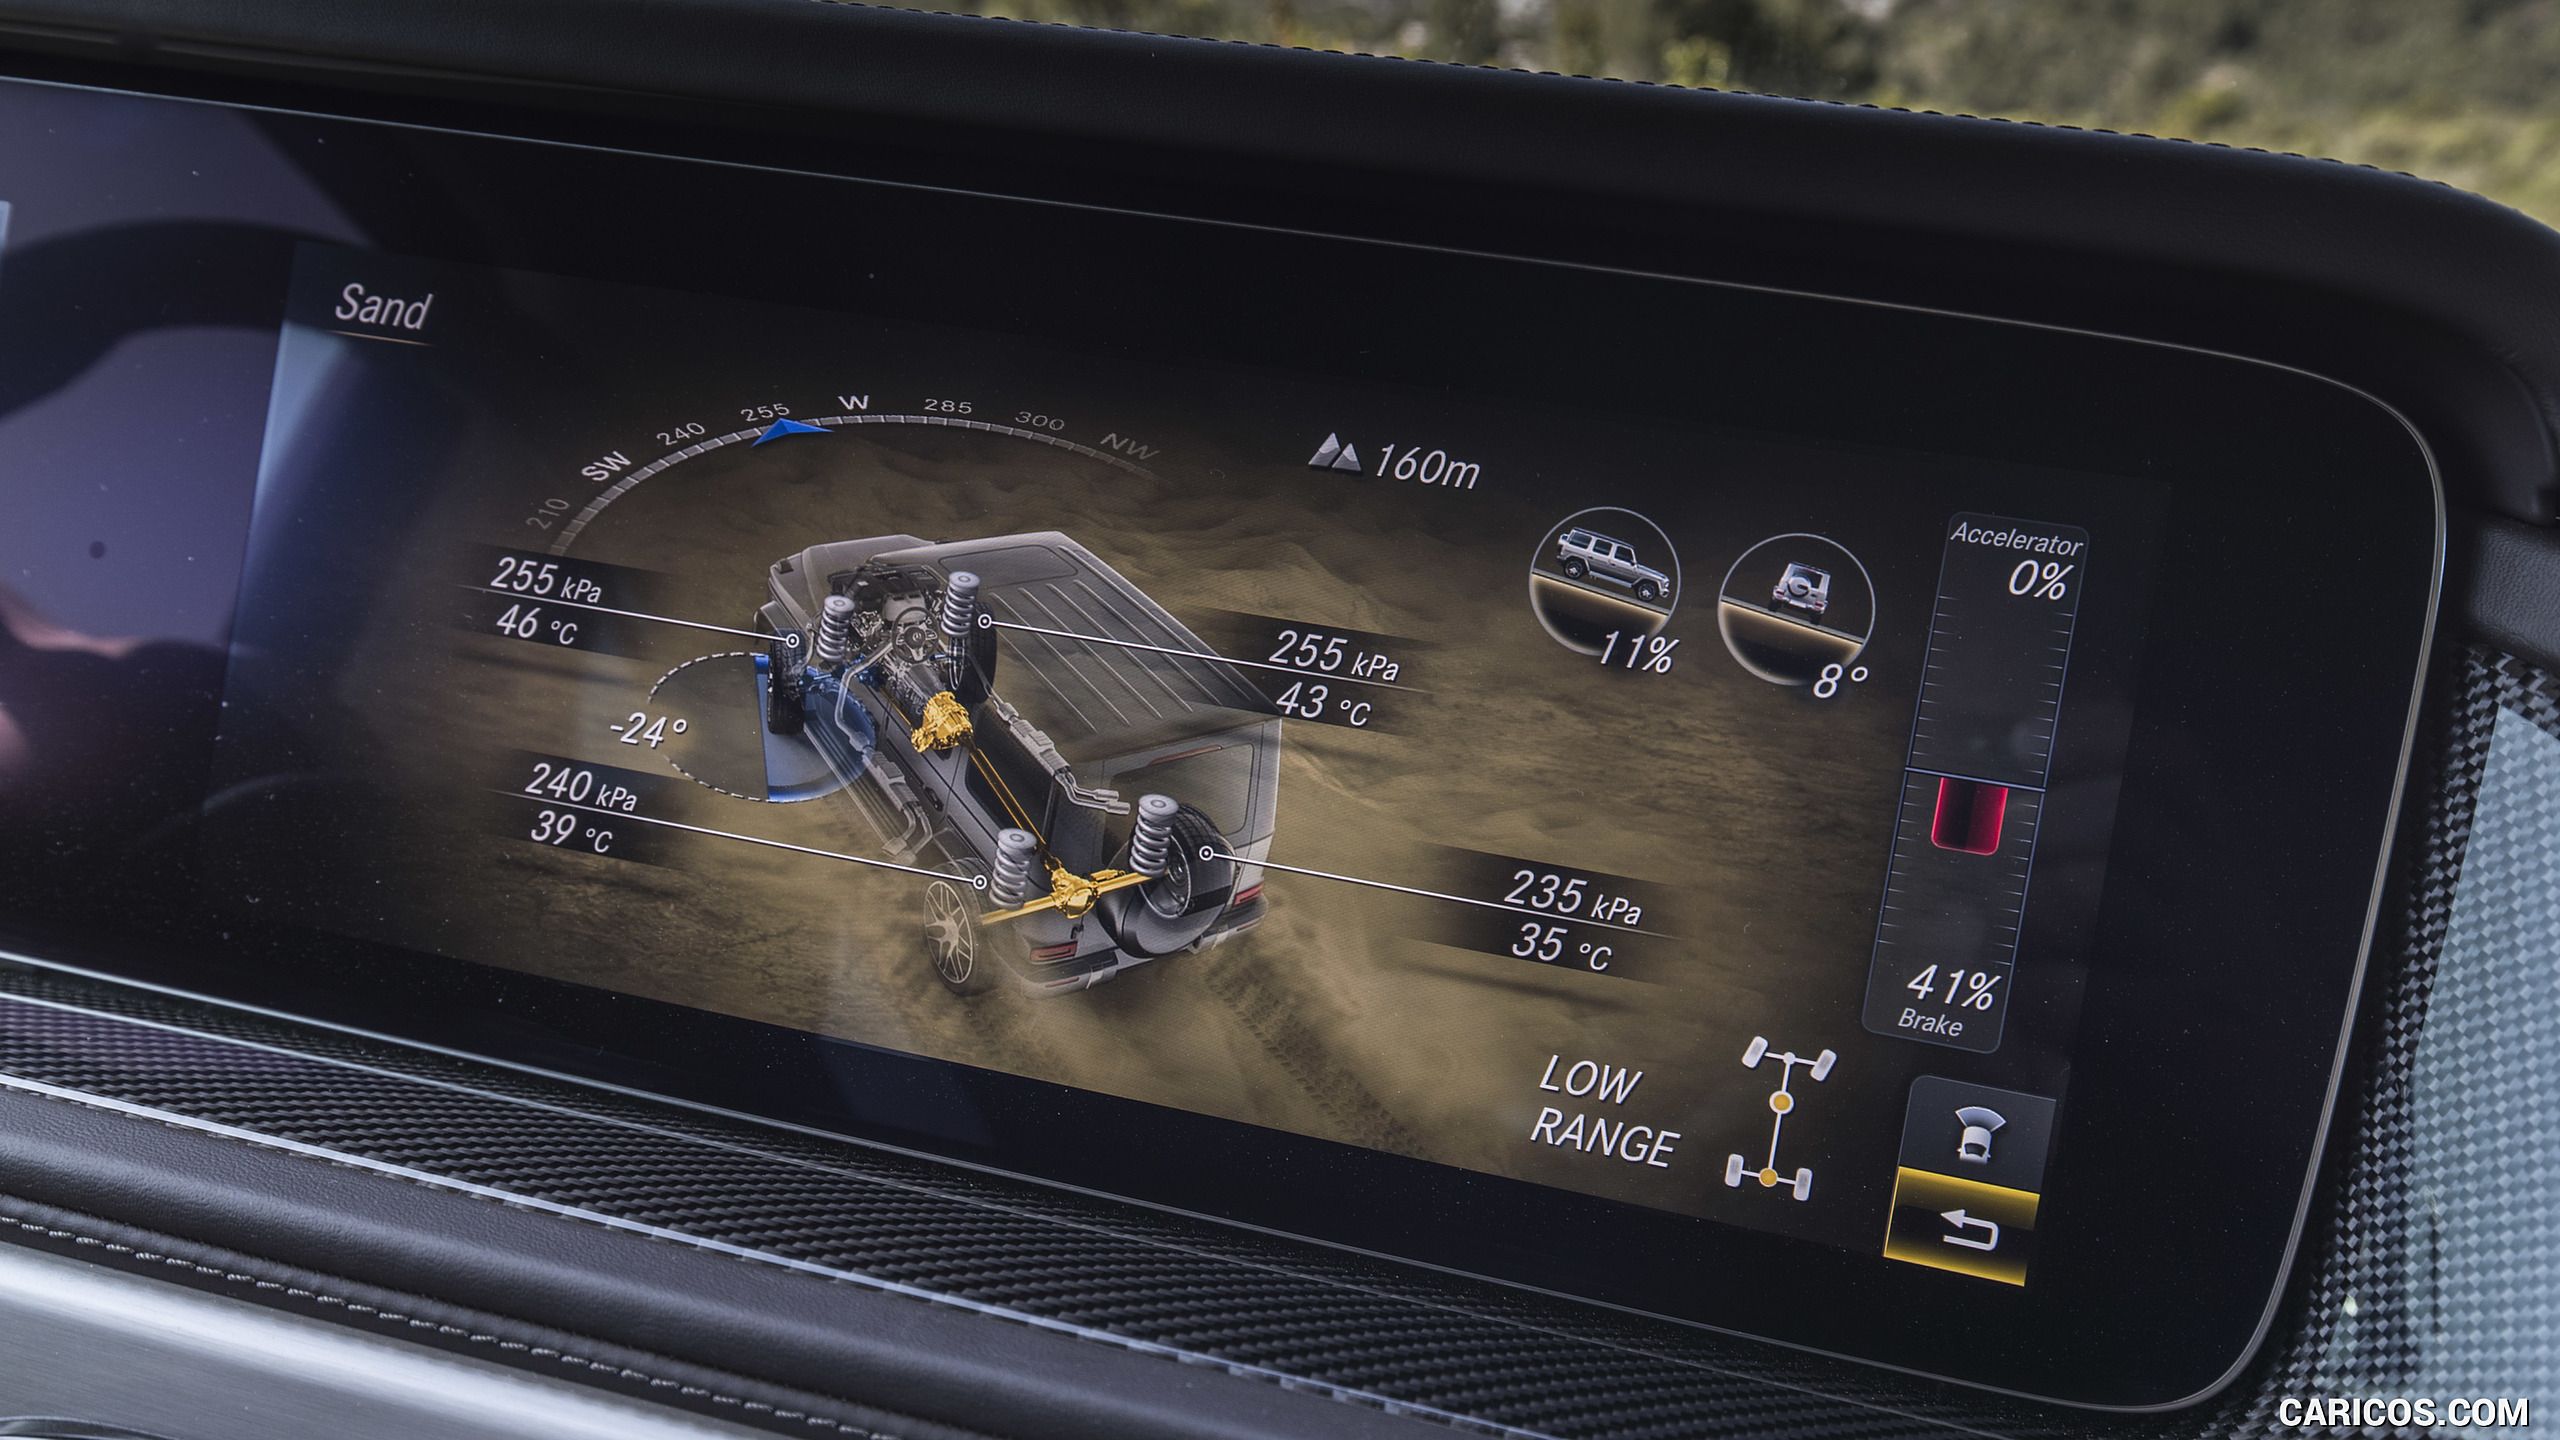 2019 Mercedes-AMG G63 - Central Console, #214 of 452